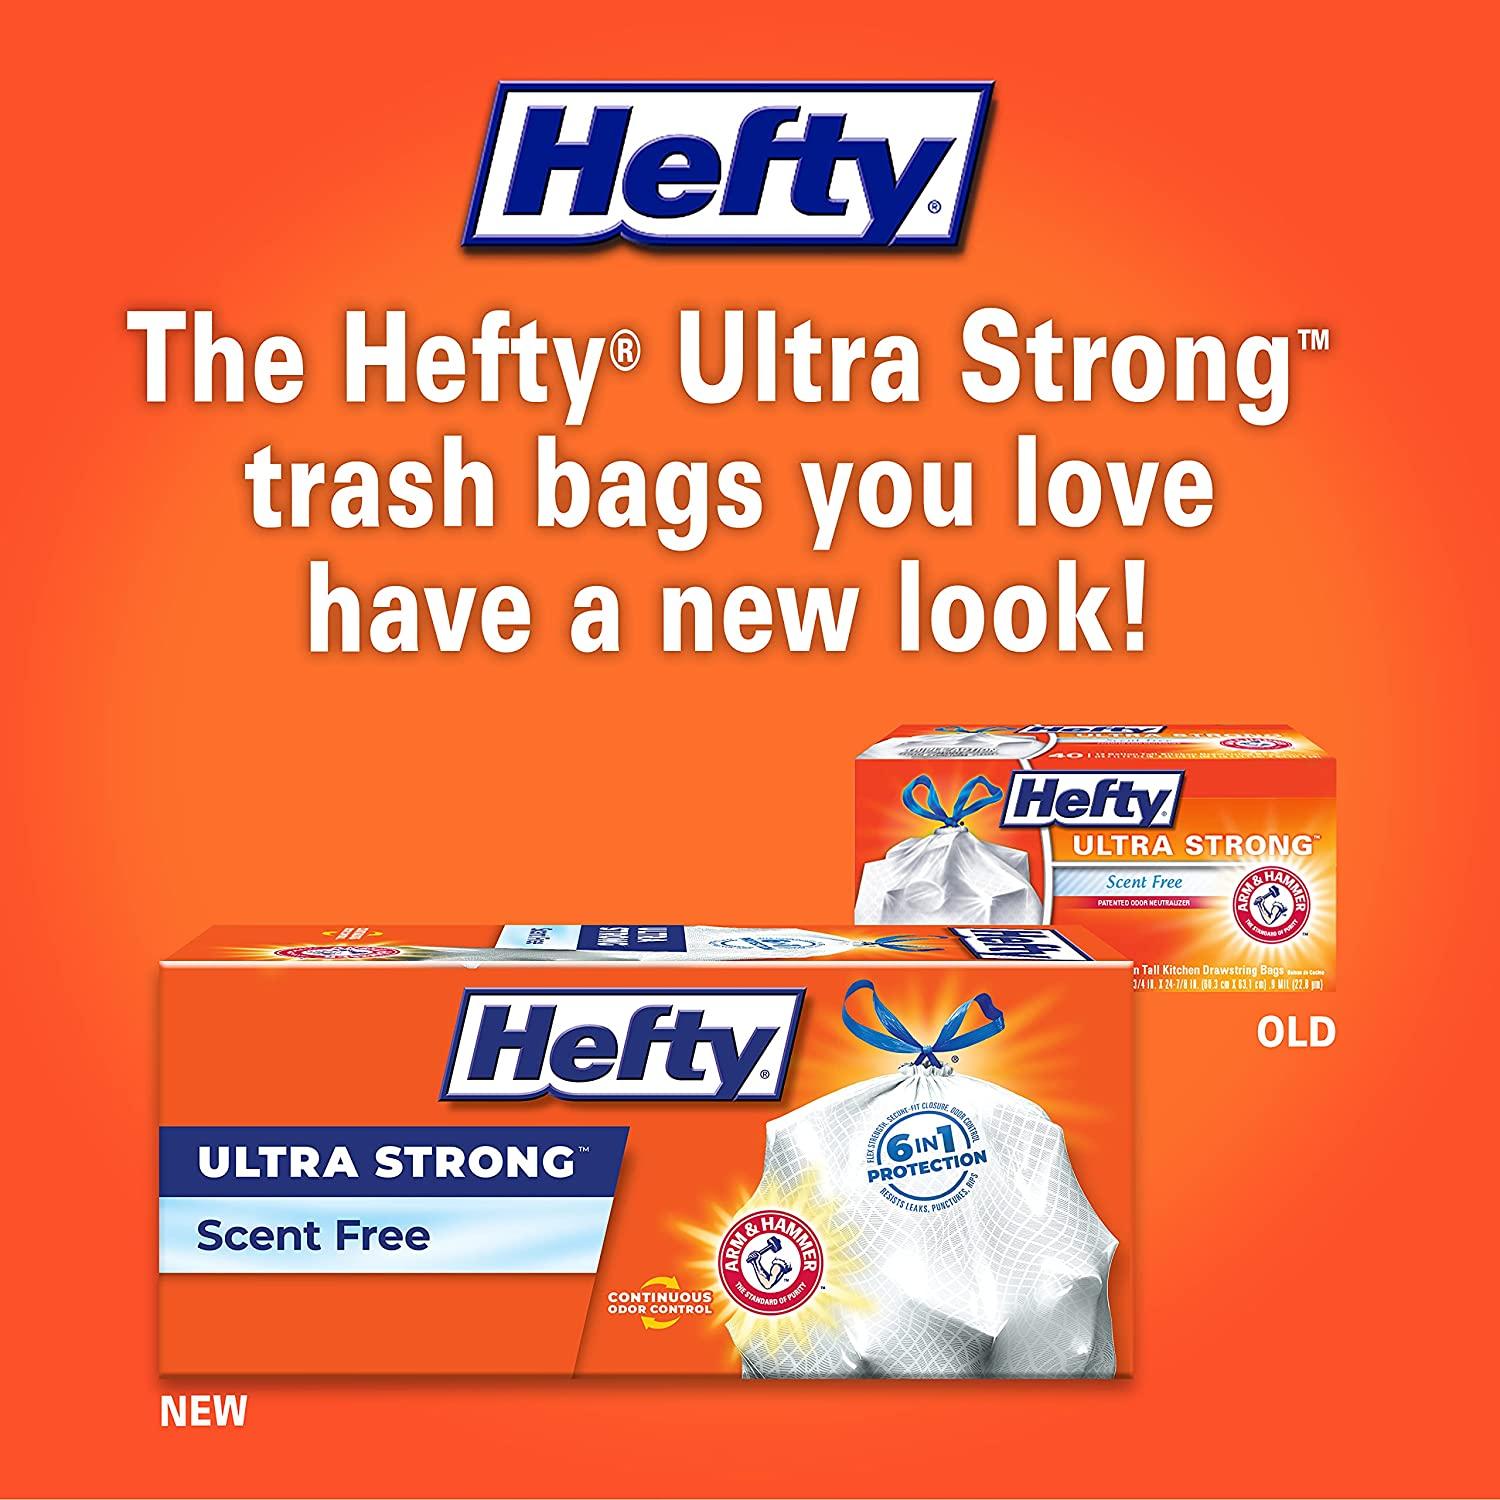 Hefty Ultra Strong Tall Kitchen Trash Bags, Unscented, 13 Gallon, 40 Count